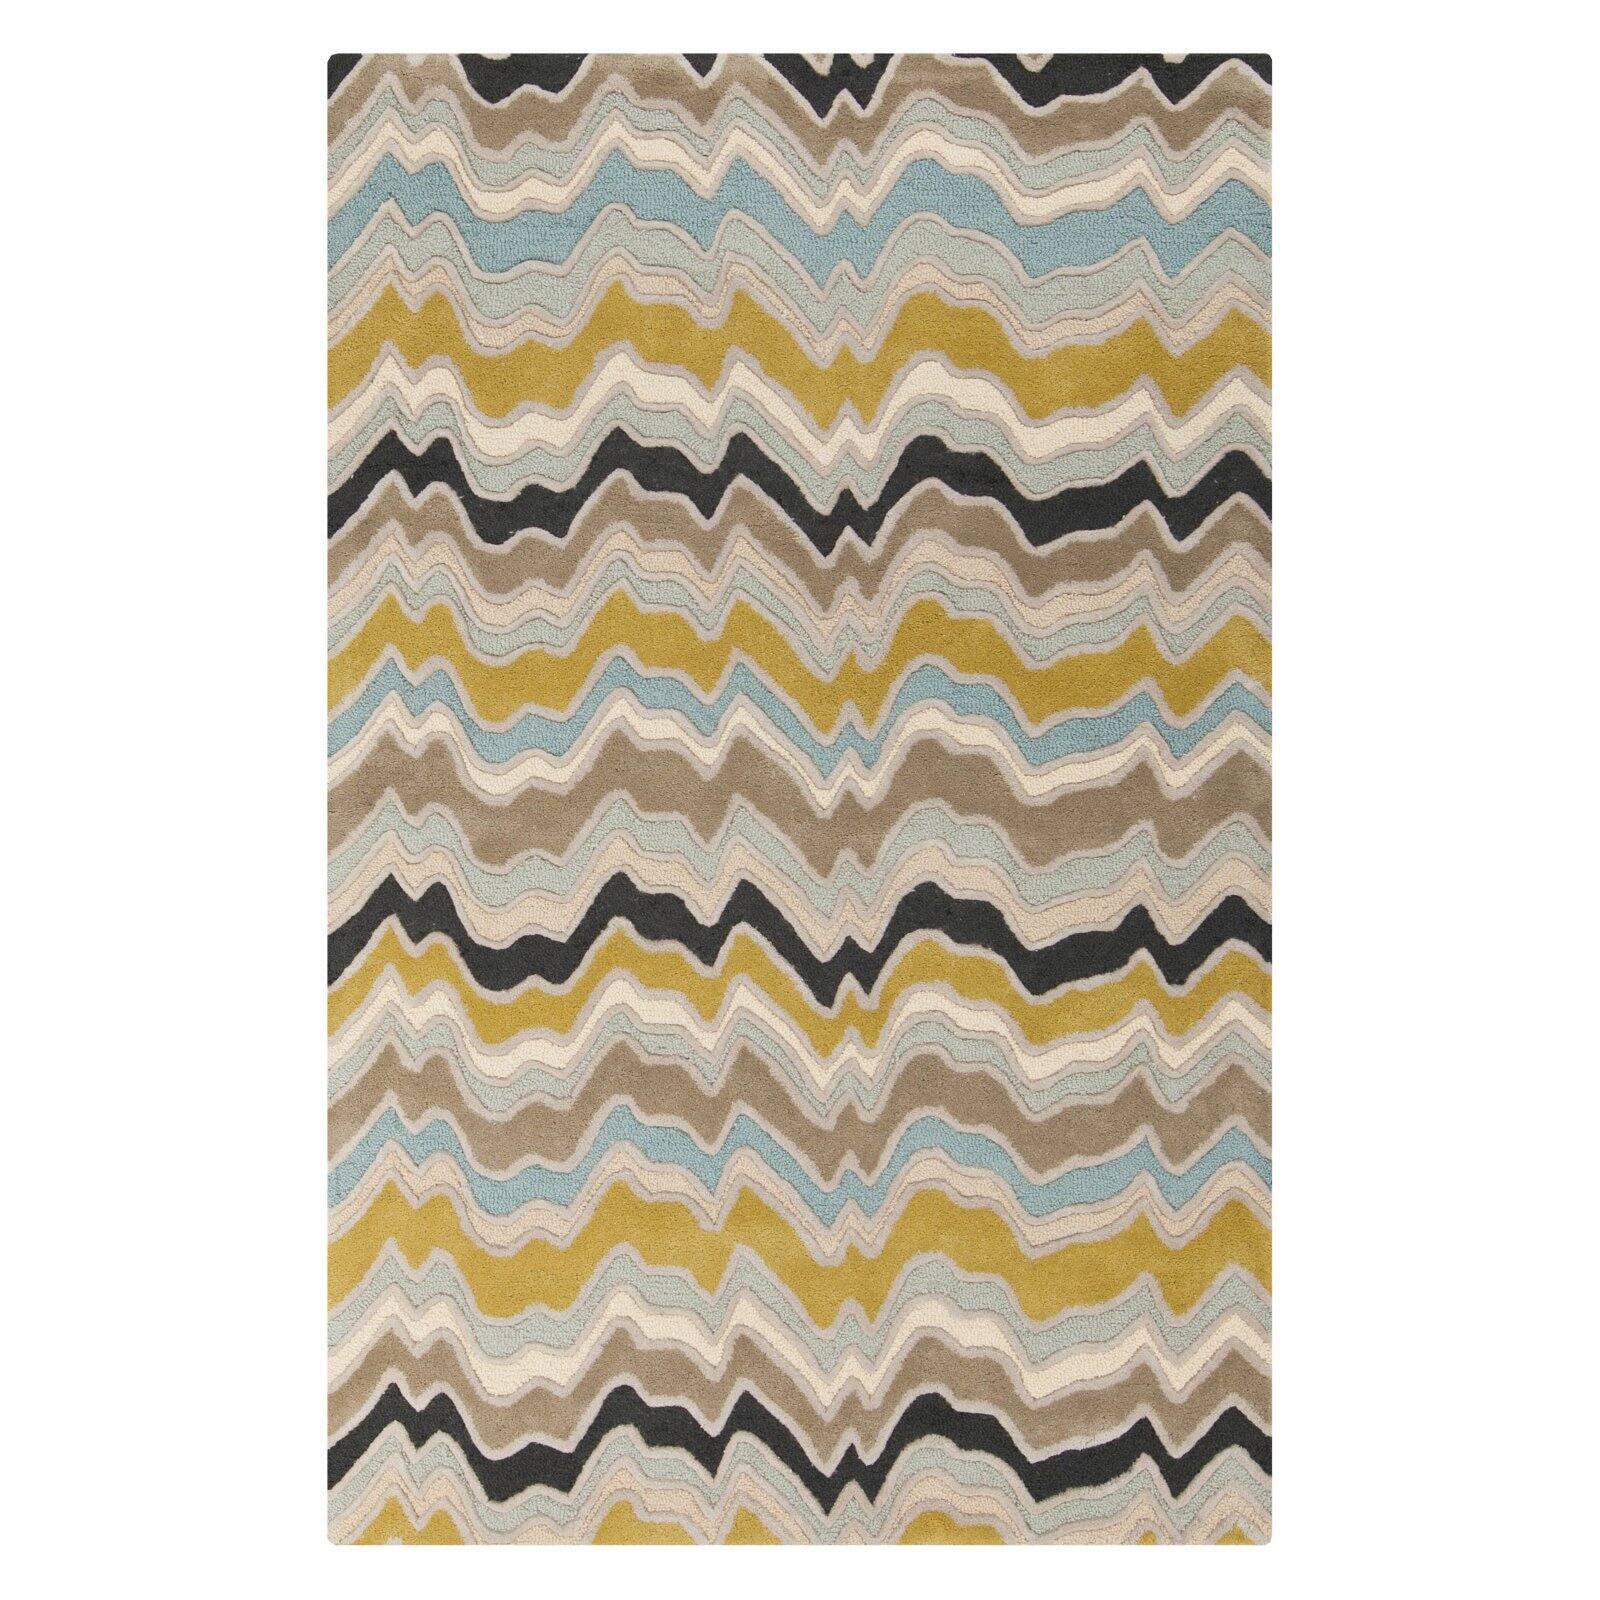 20 Candice Olson Abstract Area Rug, Candice Olson Rugs